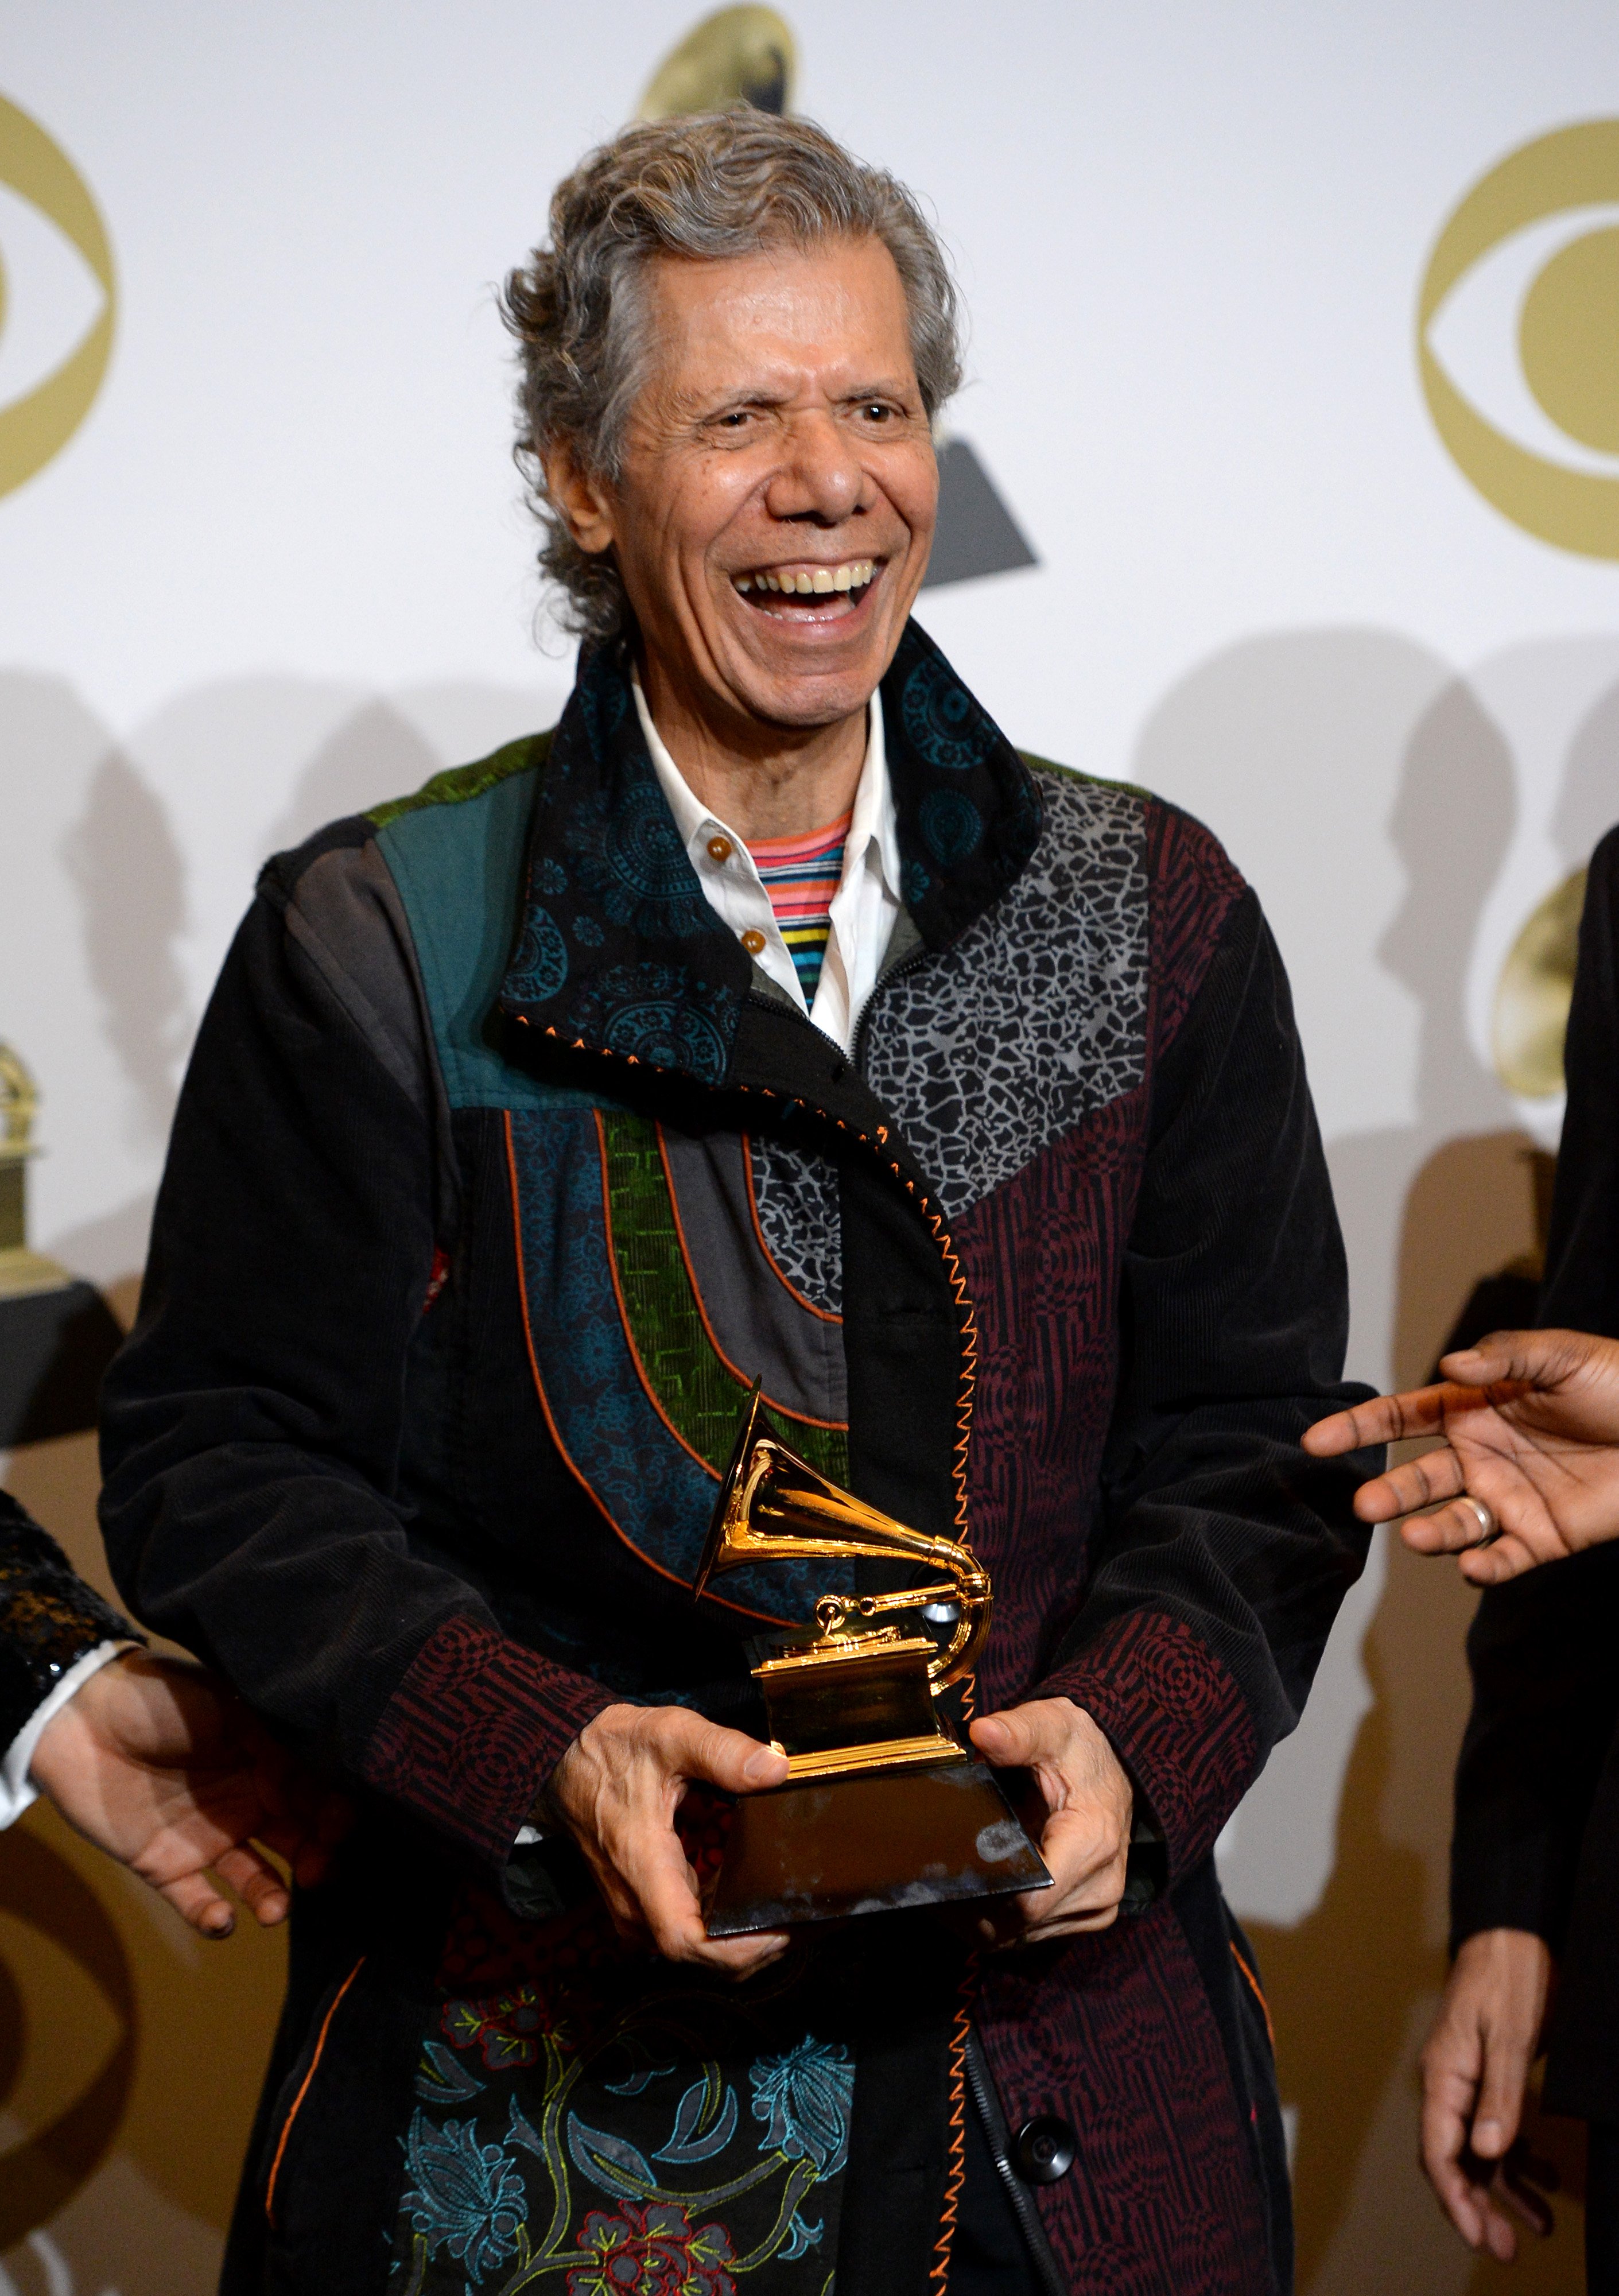 23-time Grammy Award winner and jazz pianits, Chick Corea died aged 79 on 9 February, 2021. | Photo: Getty Images.